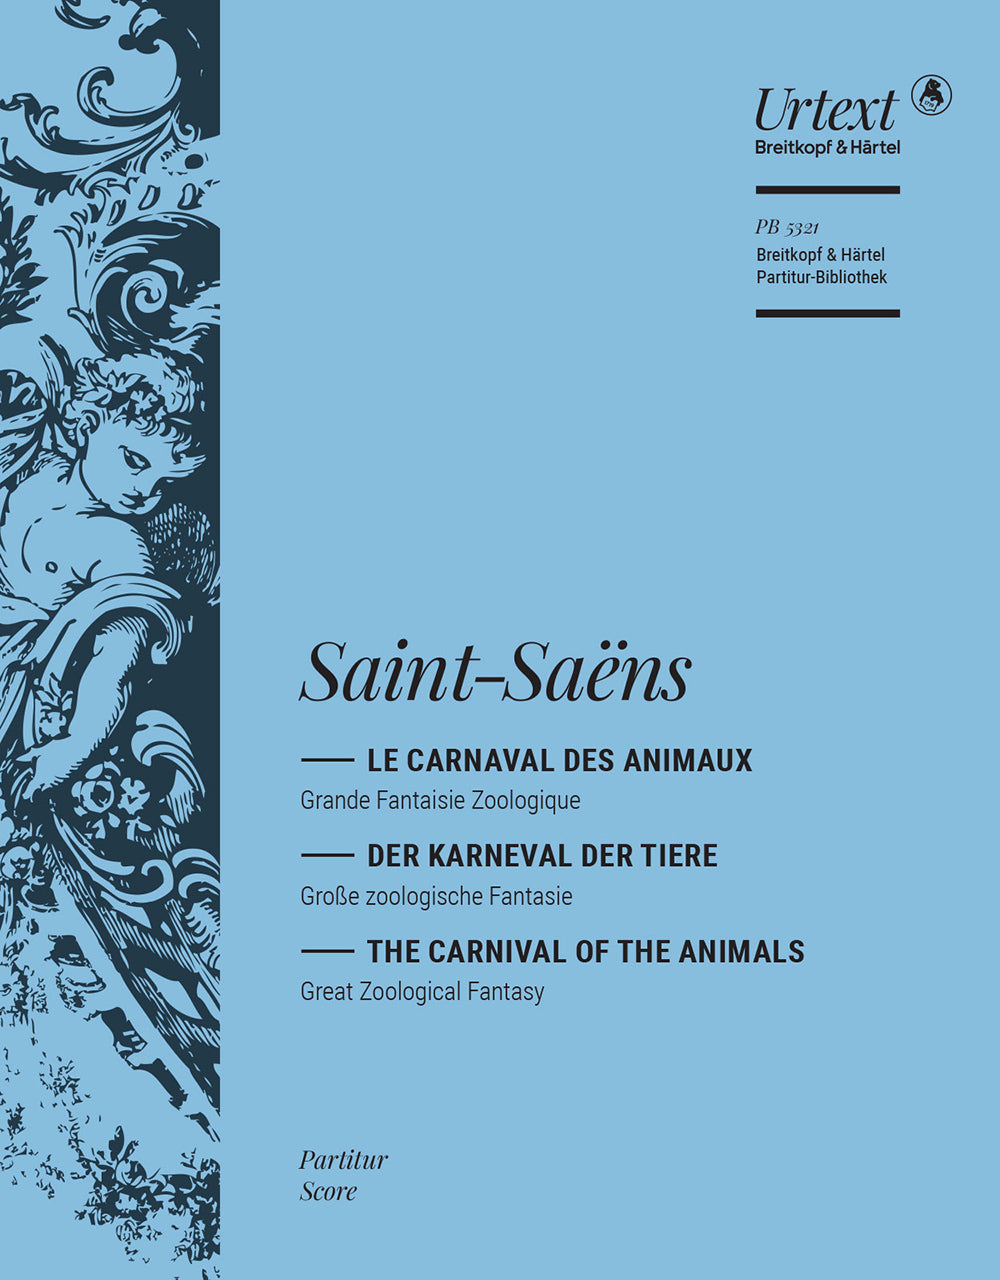 Saint-Saëns: The Carnival of the Animals